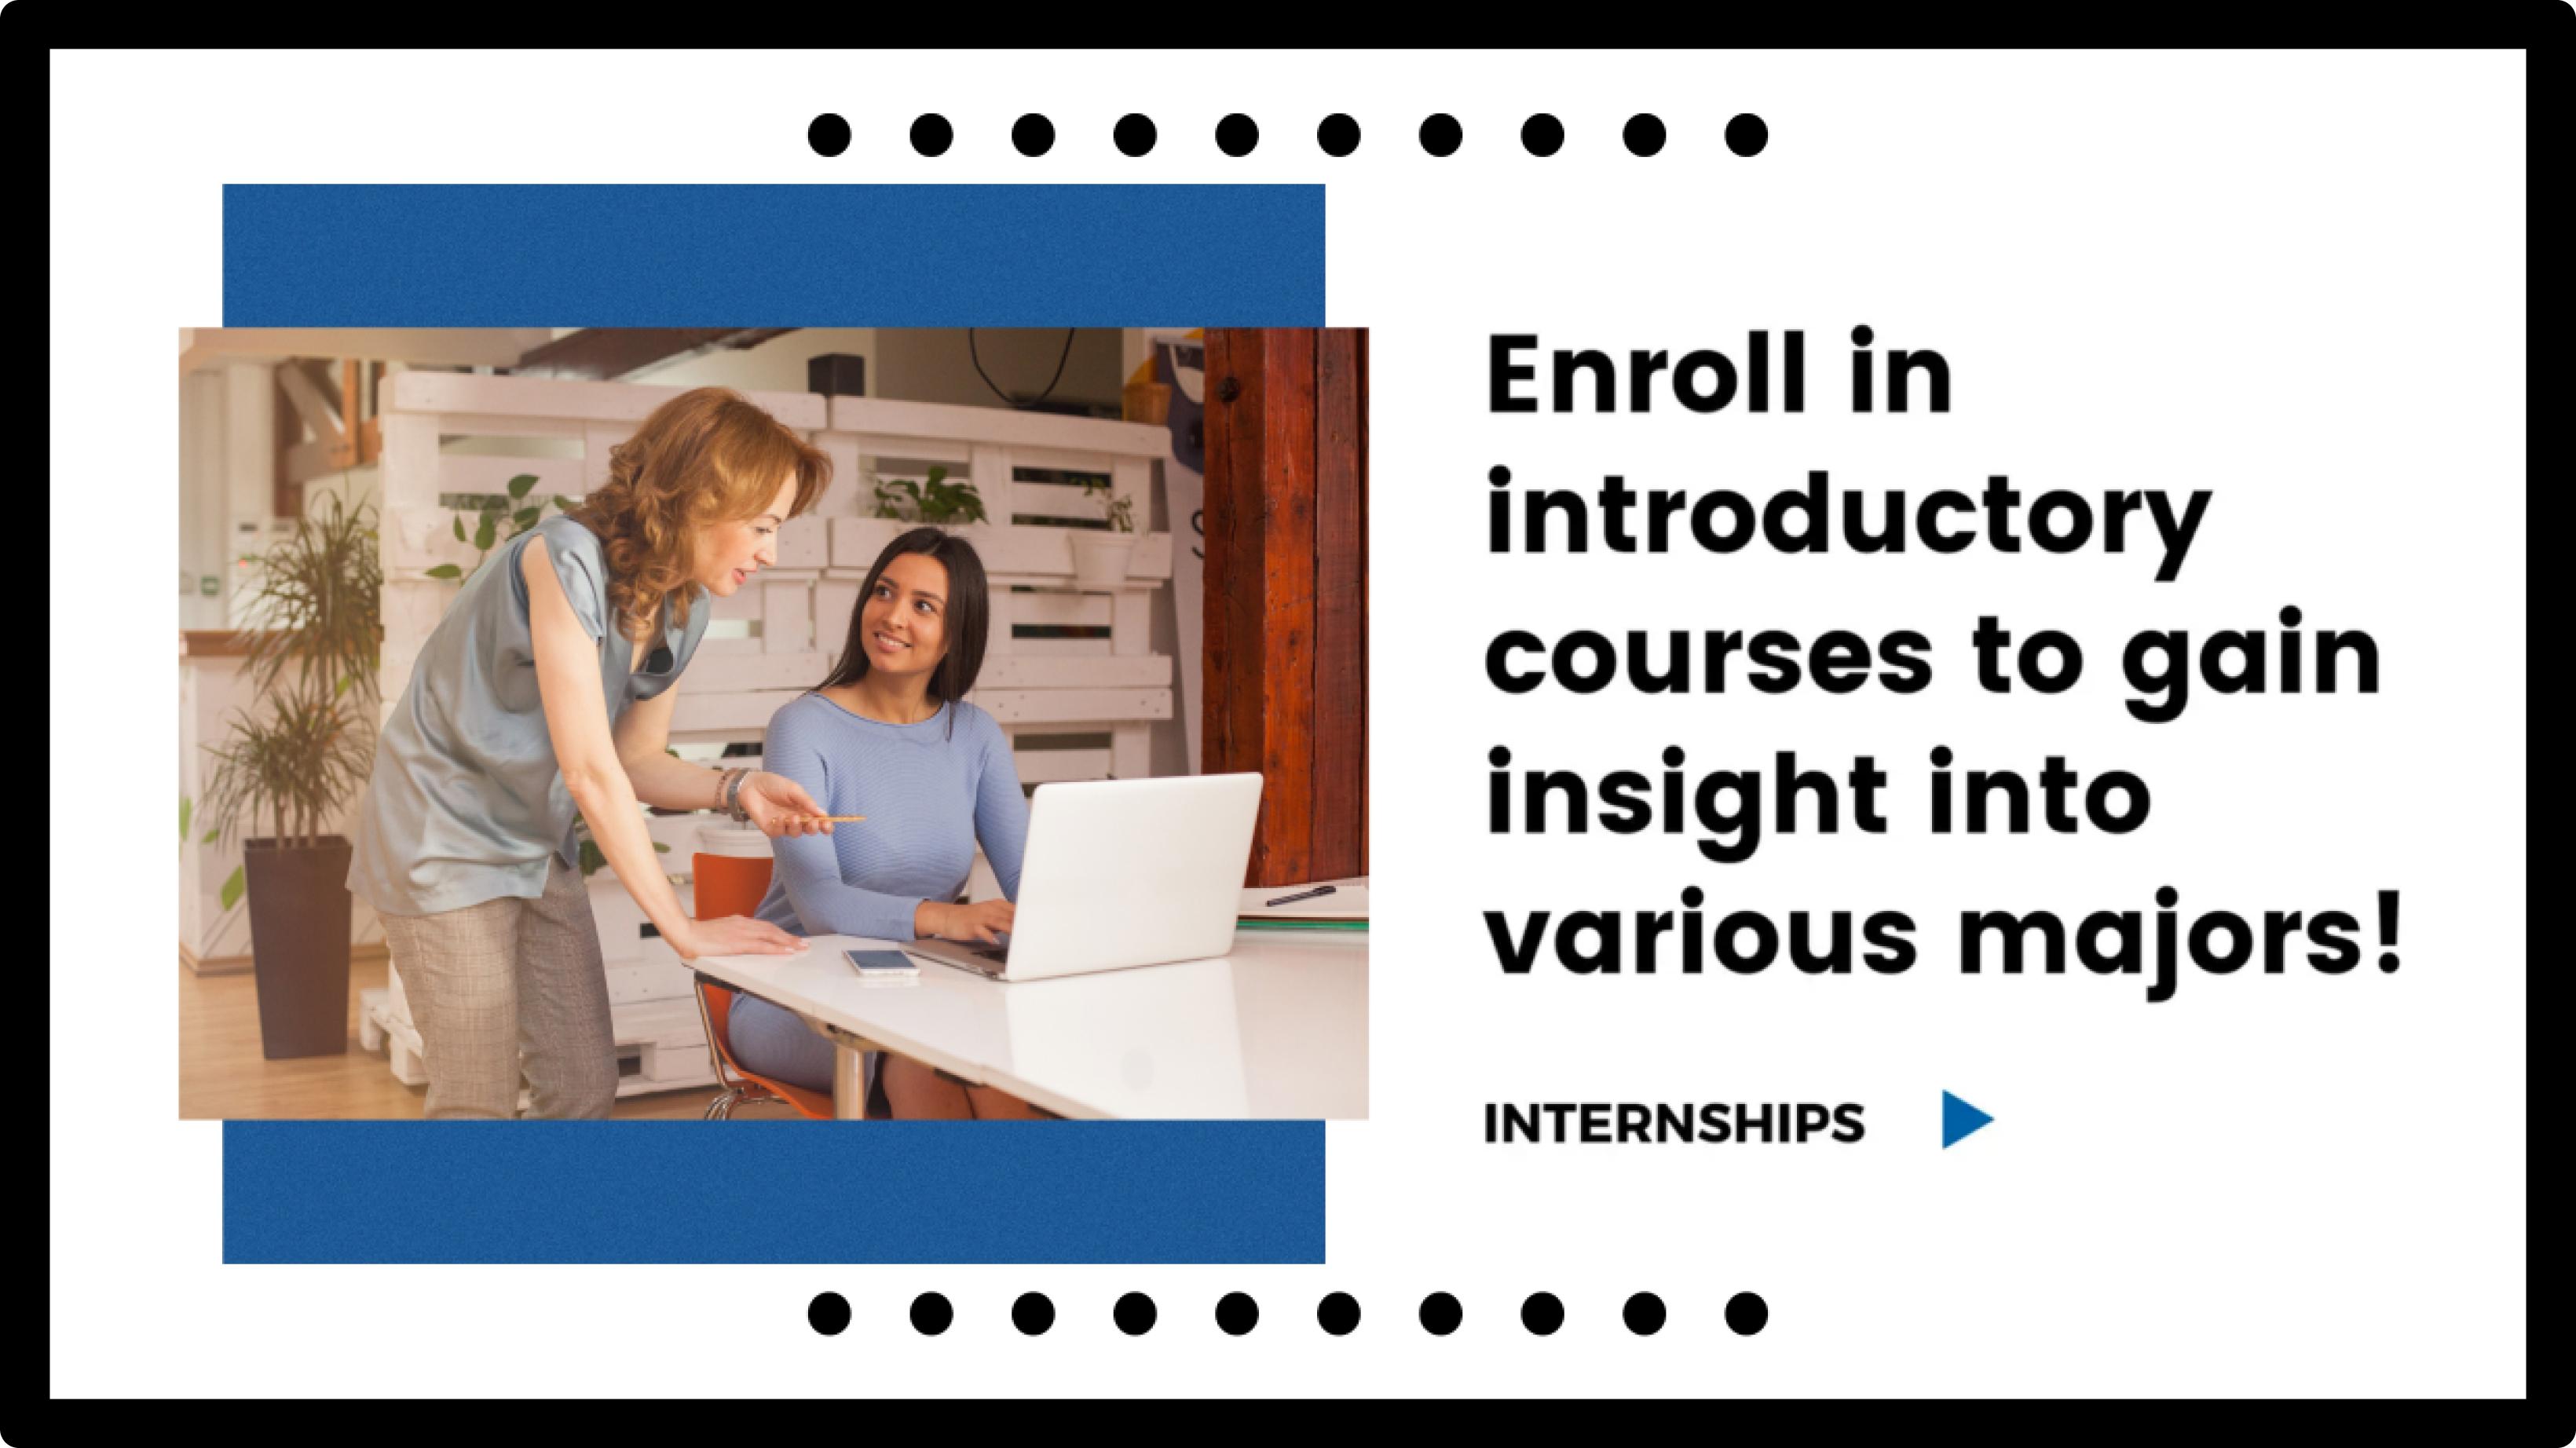 Screen example: Enroll in introductory courses